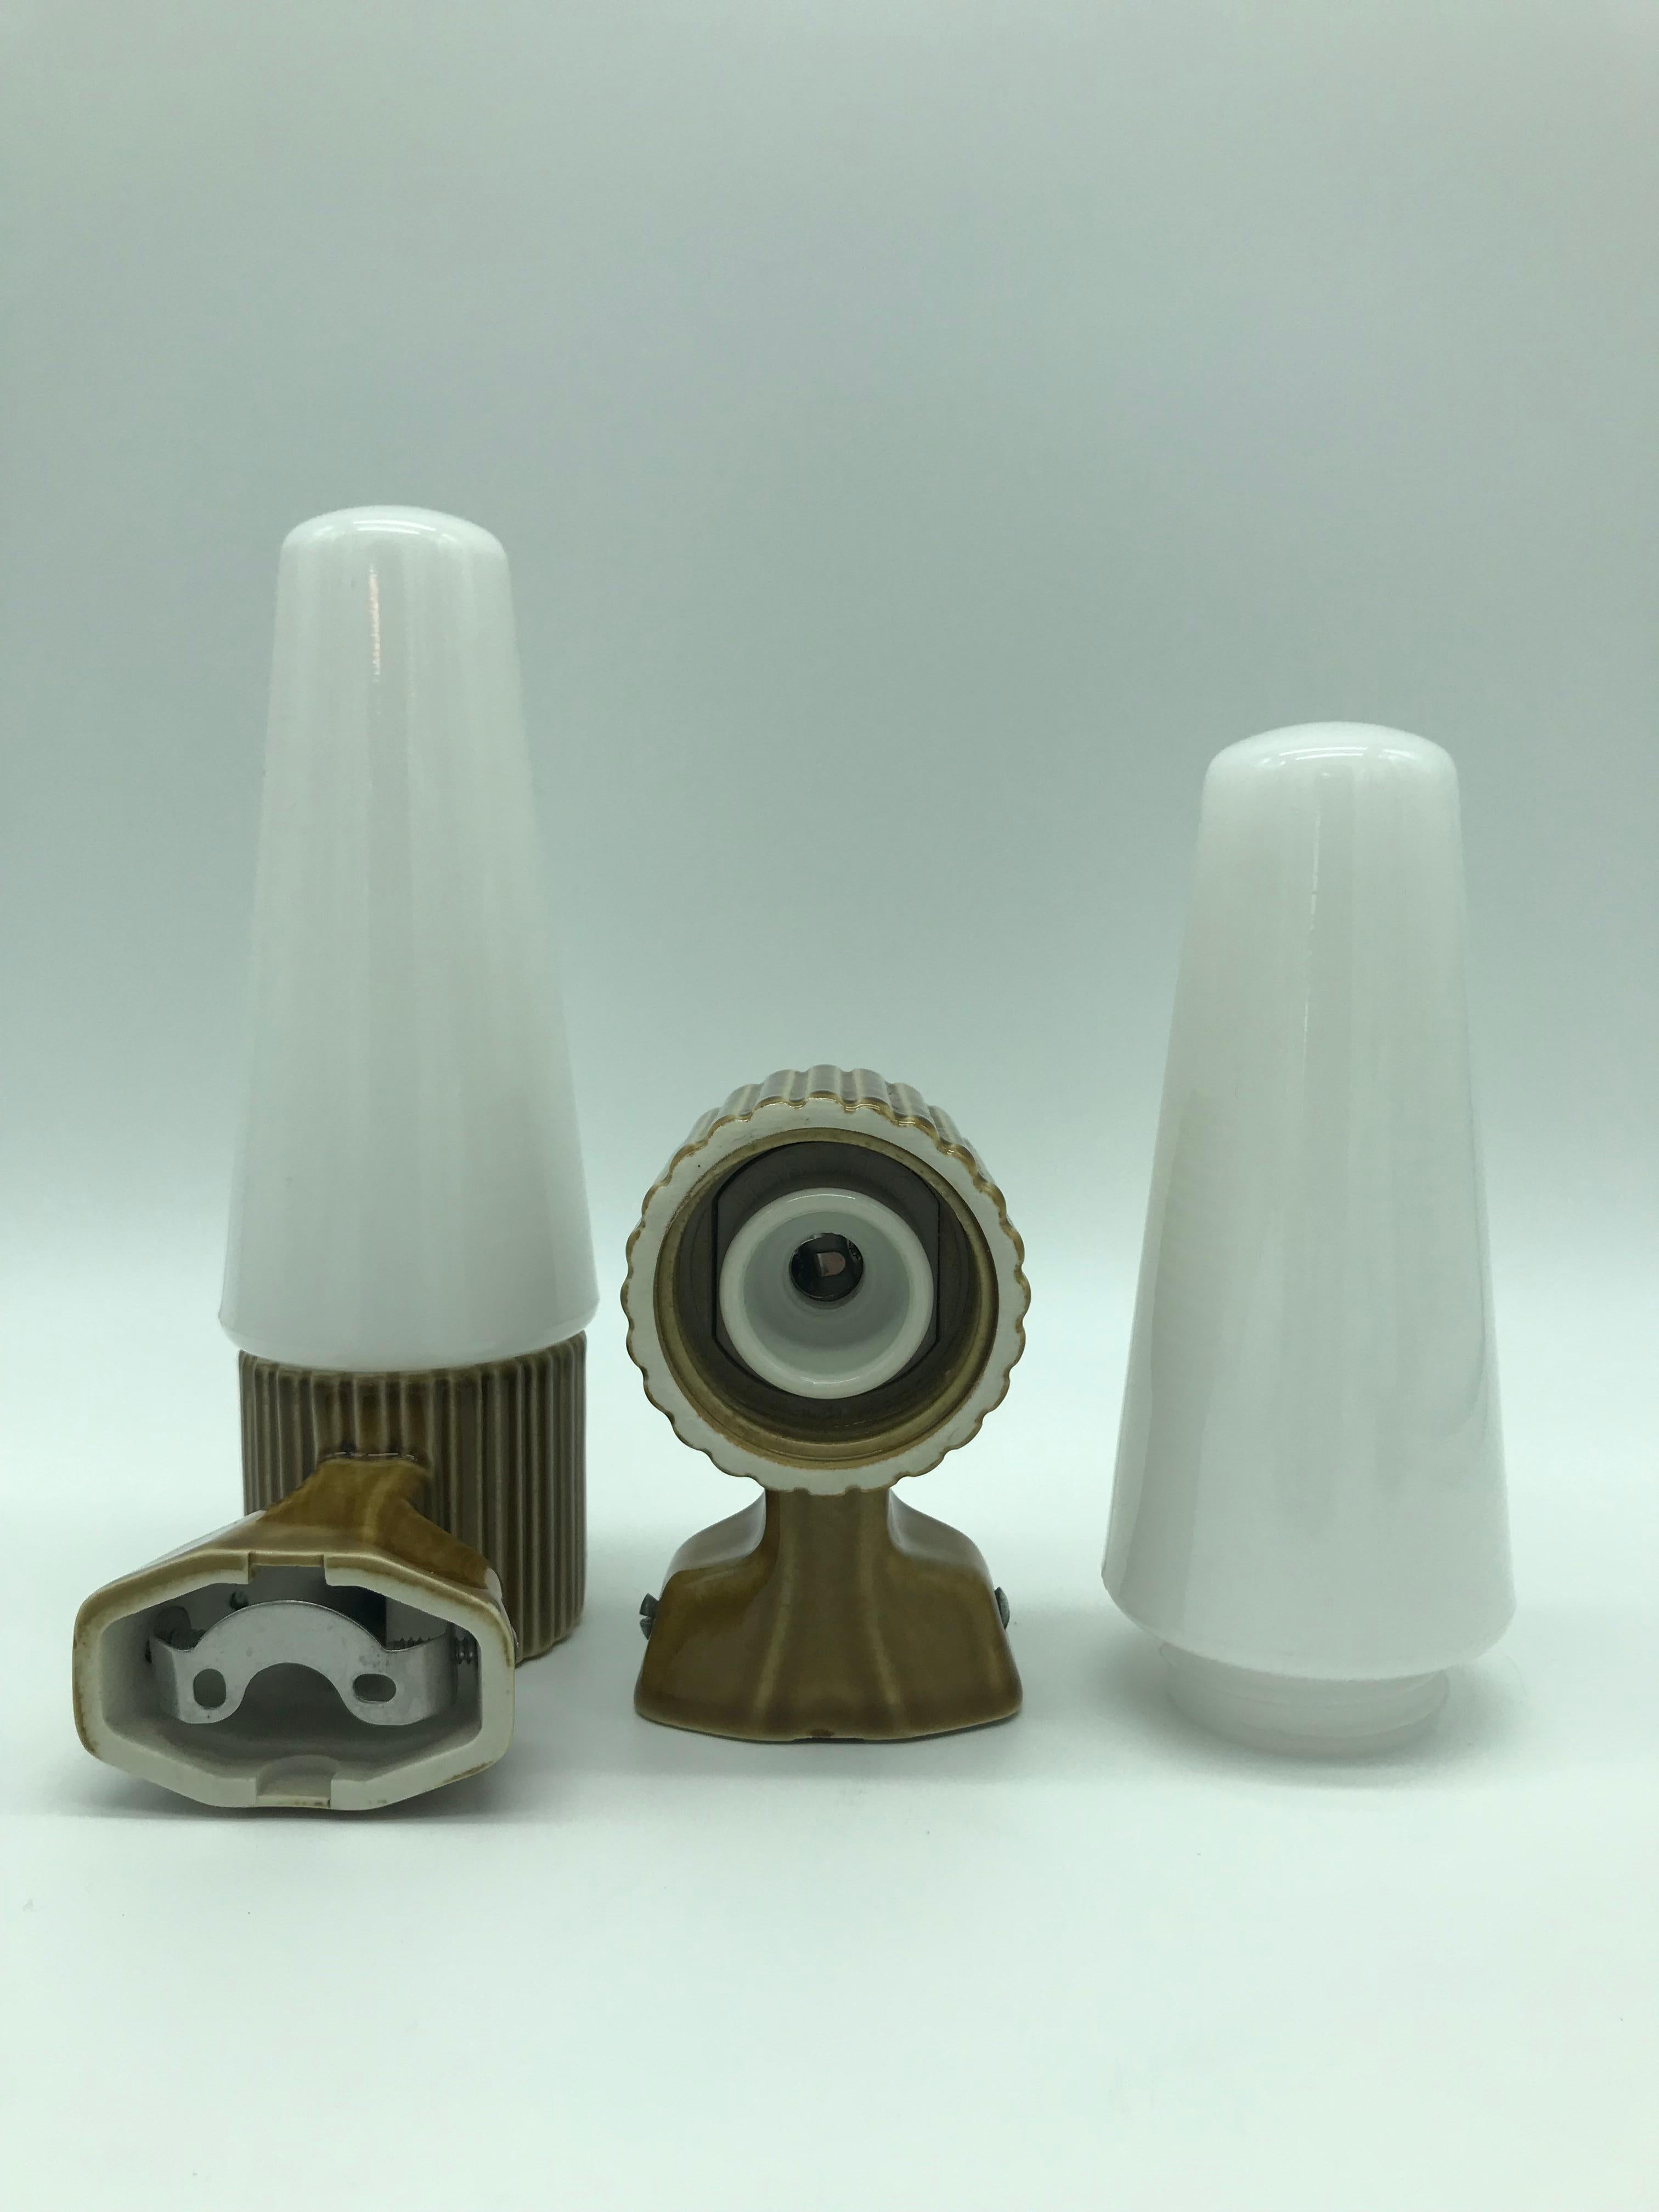 Swedish Vintage Ifö of Sweden Ceramic Bathroom Lamps with Opaline Shades from the 1960s